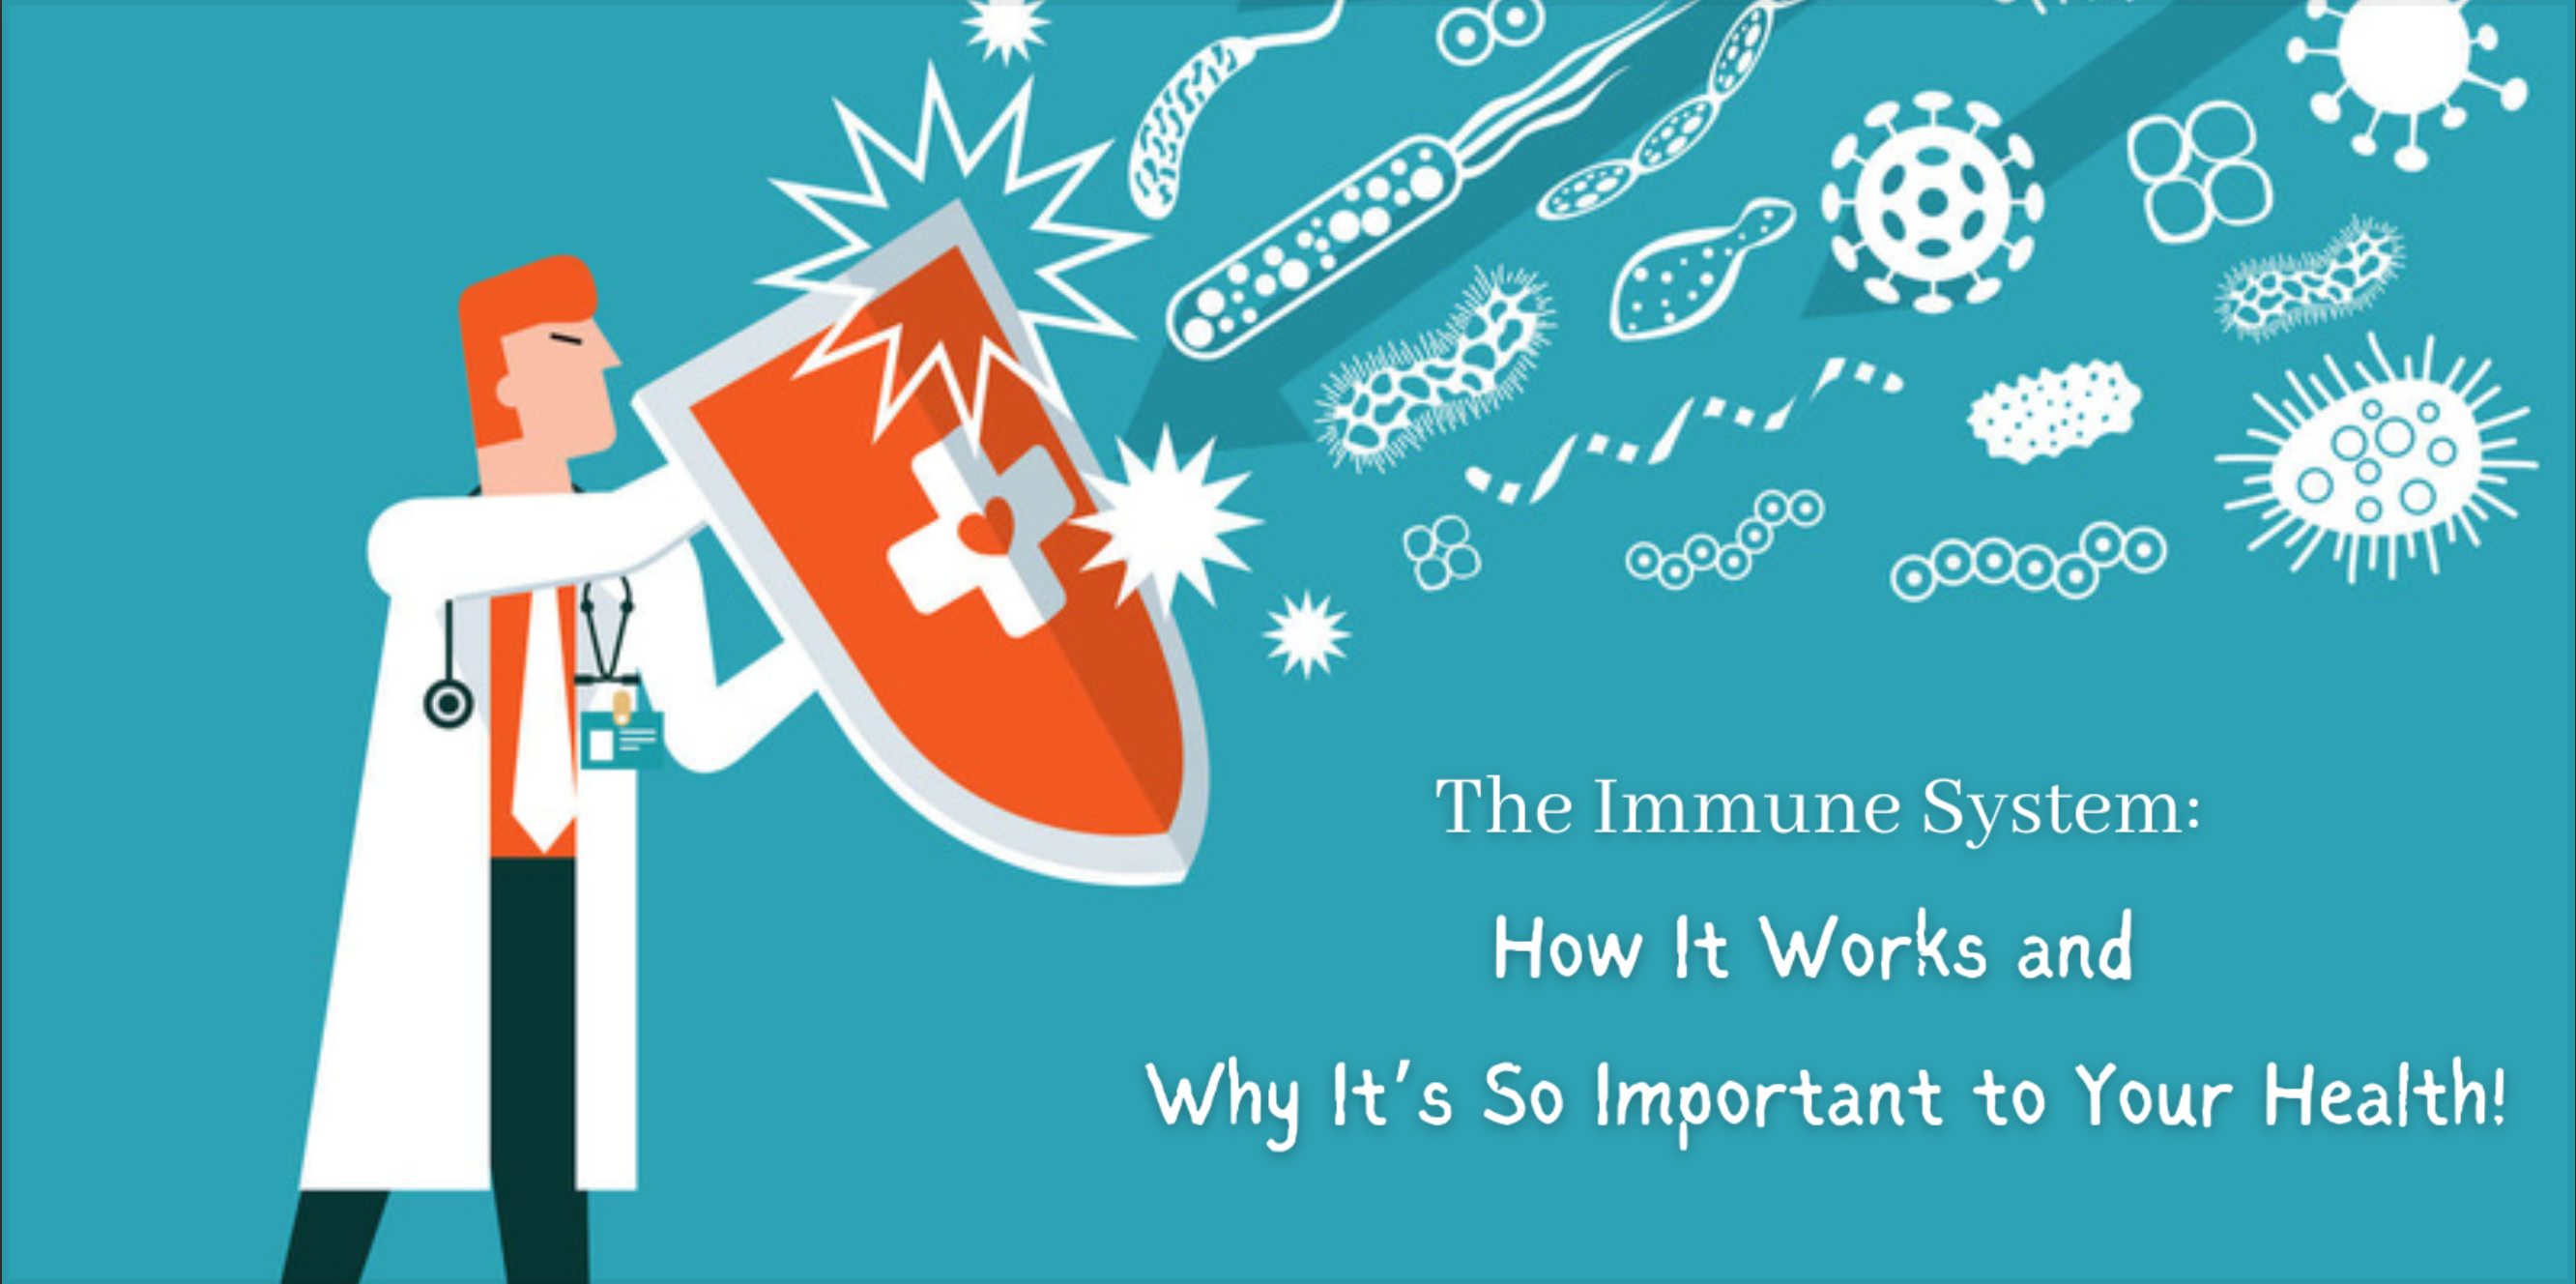 The Immune System: How It Works and Why It’s So Important to Your Health